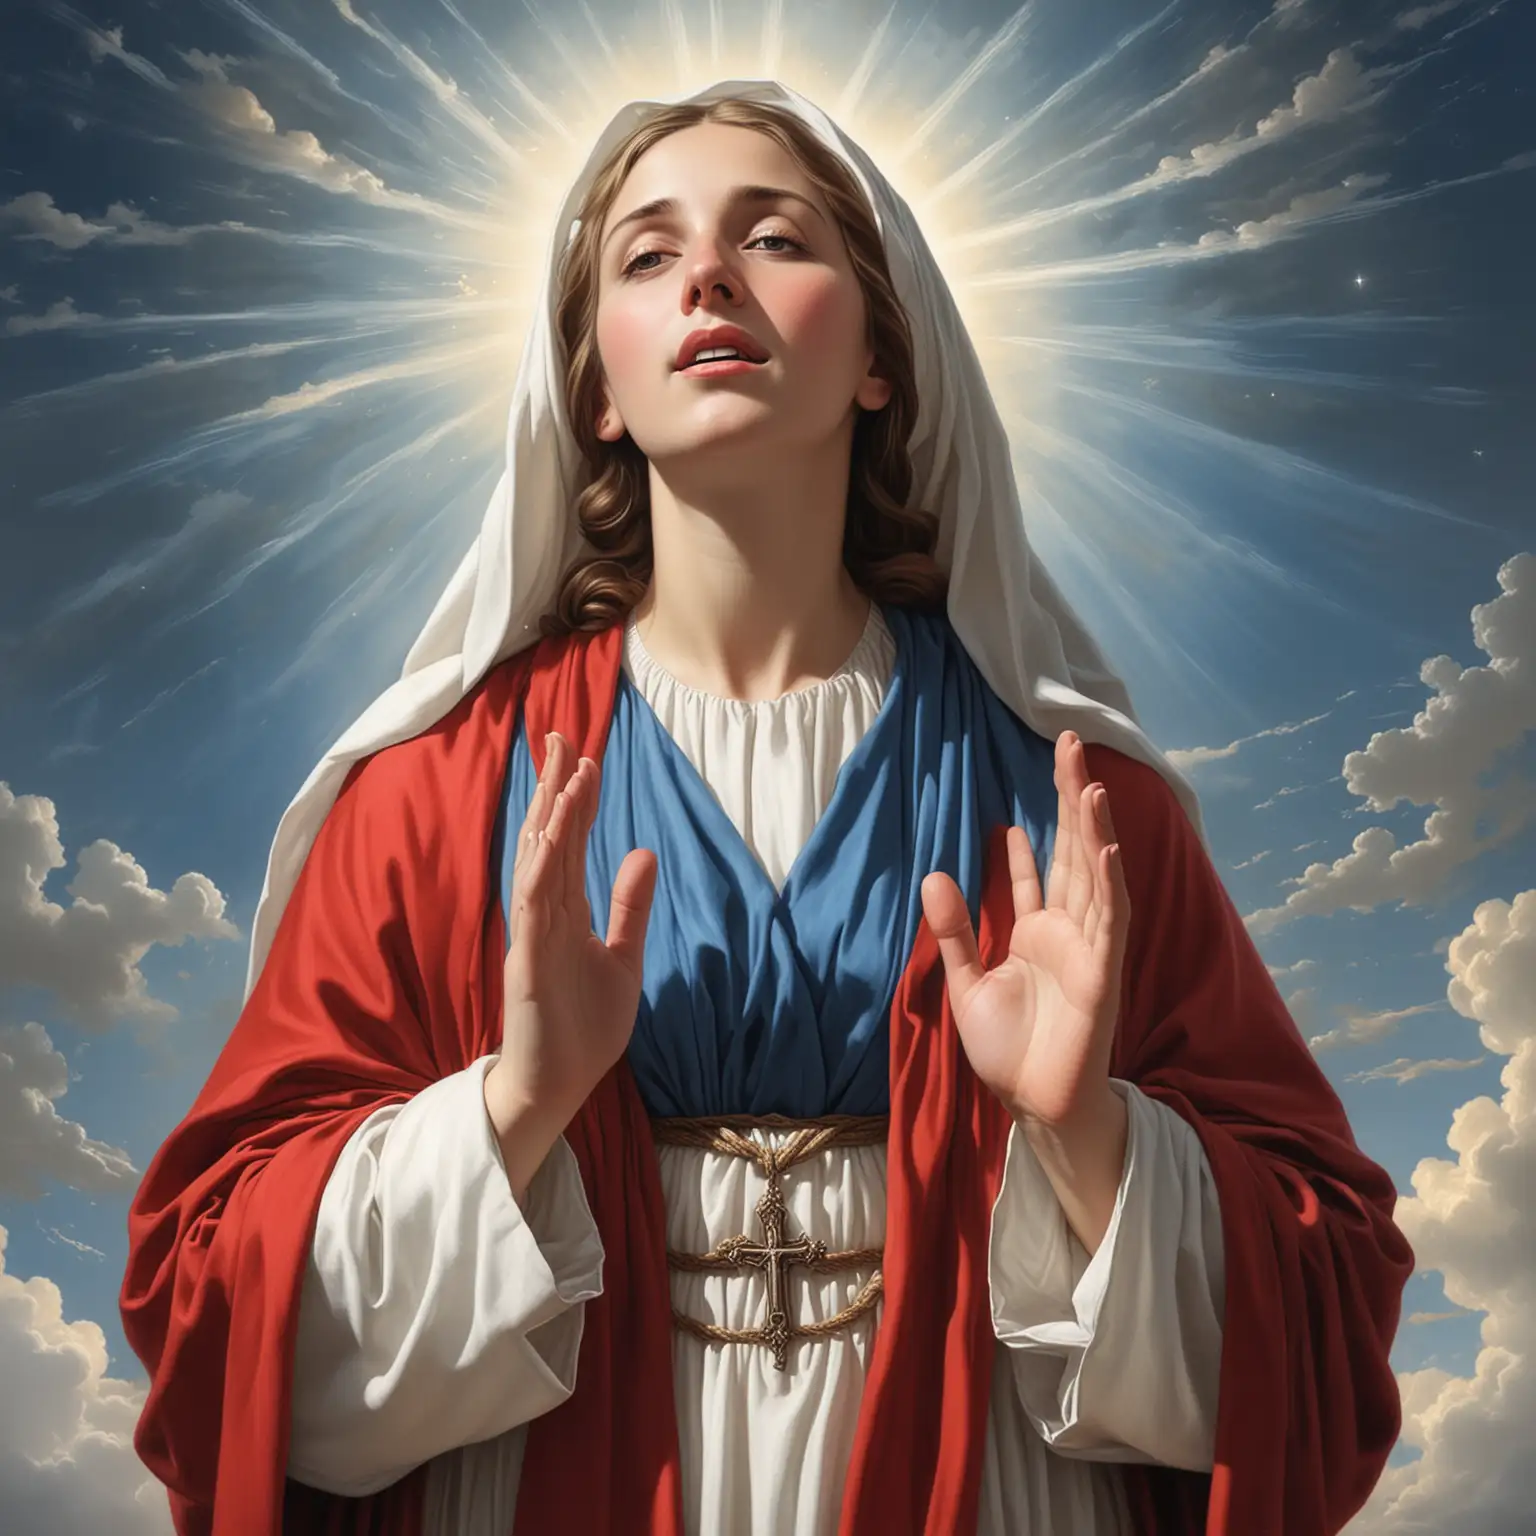 The virgin mary, wearing a red dress under a blue mantle, a white scarf around her head tied with a knot below her neck, looking up to the sky, with both hands raised in an act of praise.  The image is rendered in the style of Italian artist Giovanni Gasparro